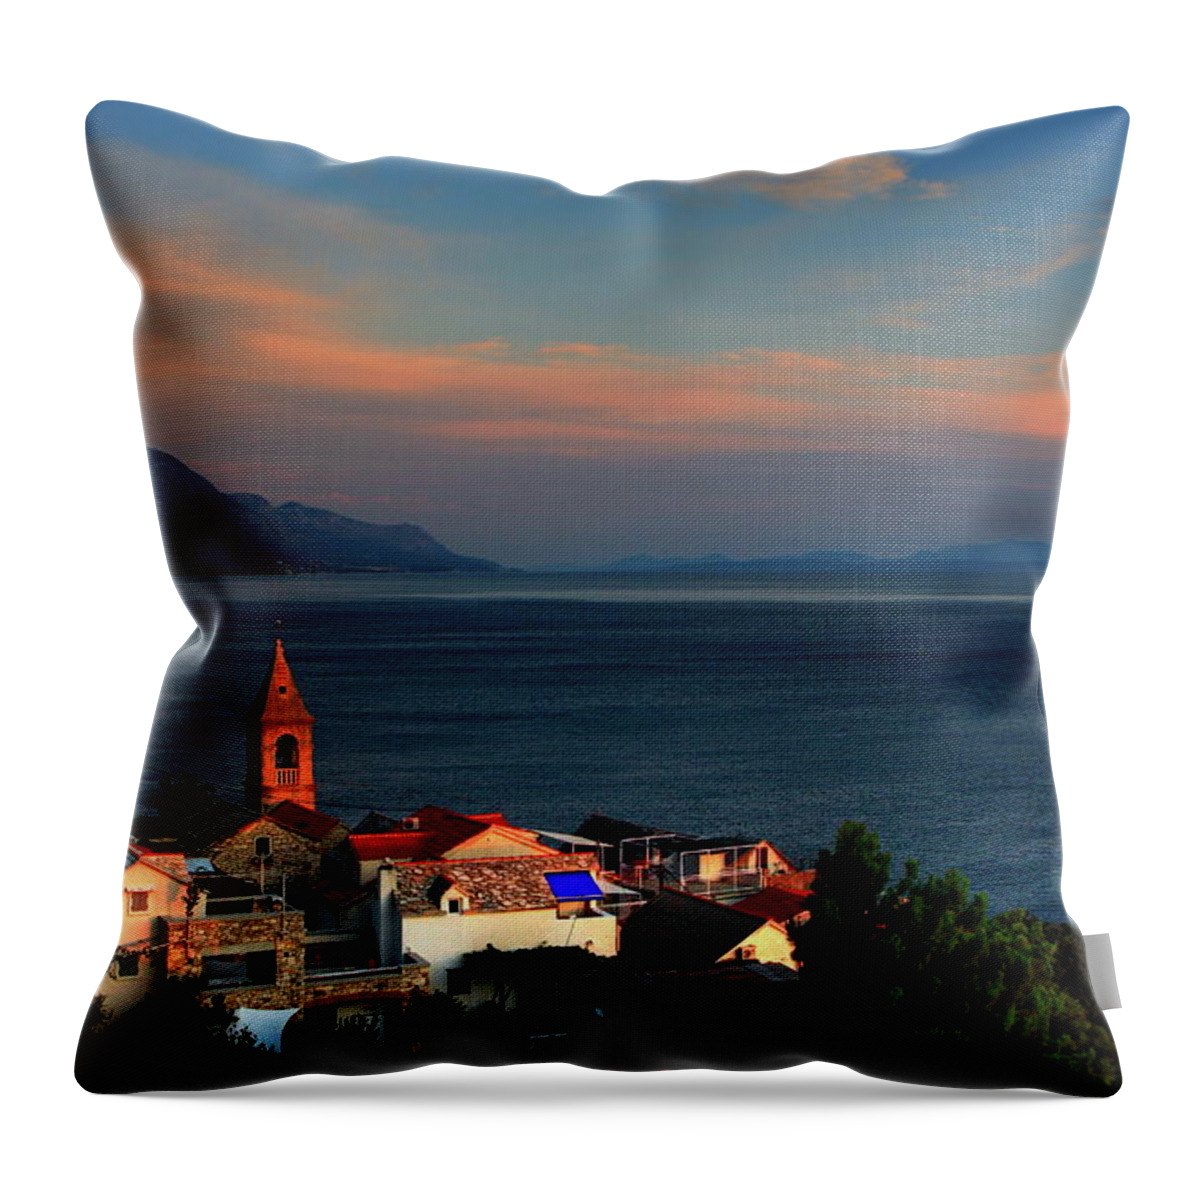 Tranquility Throw Pillow featuring the photograph Sunset On The Adriatic by Tozofoto